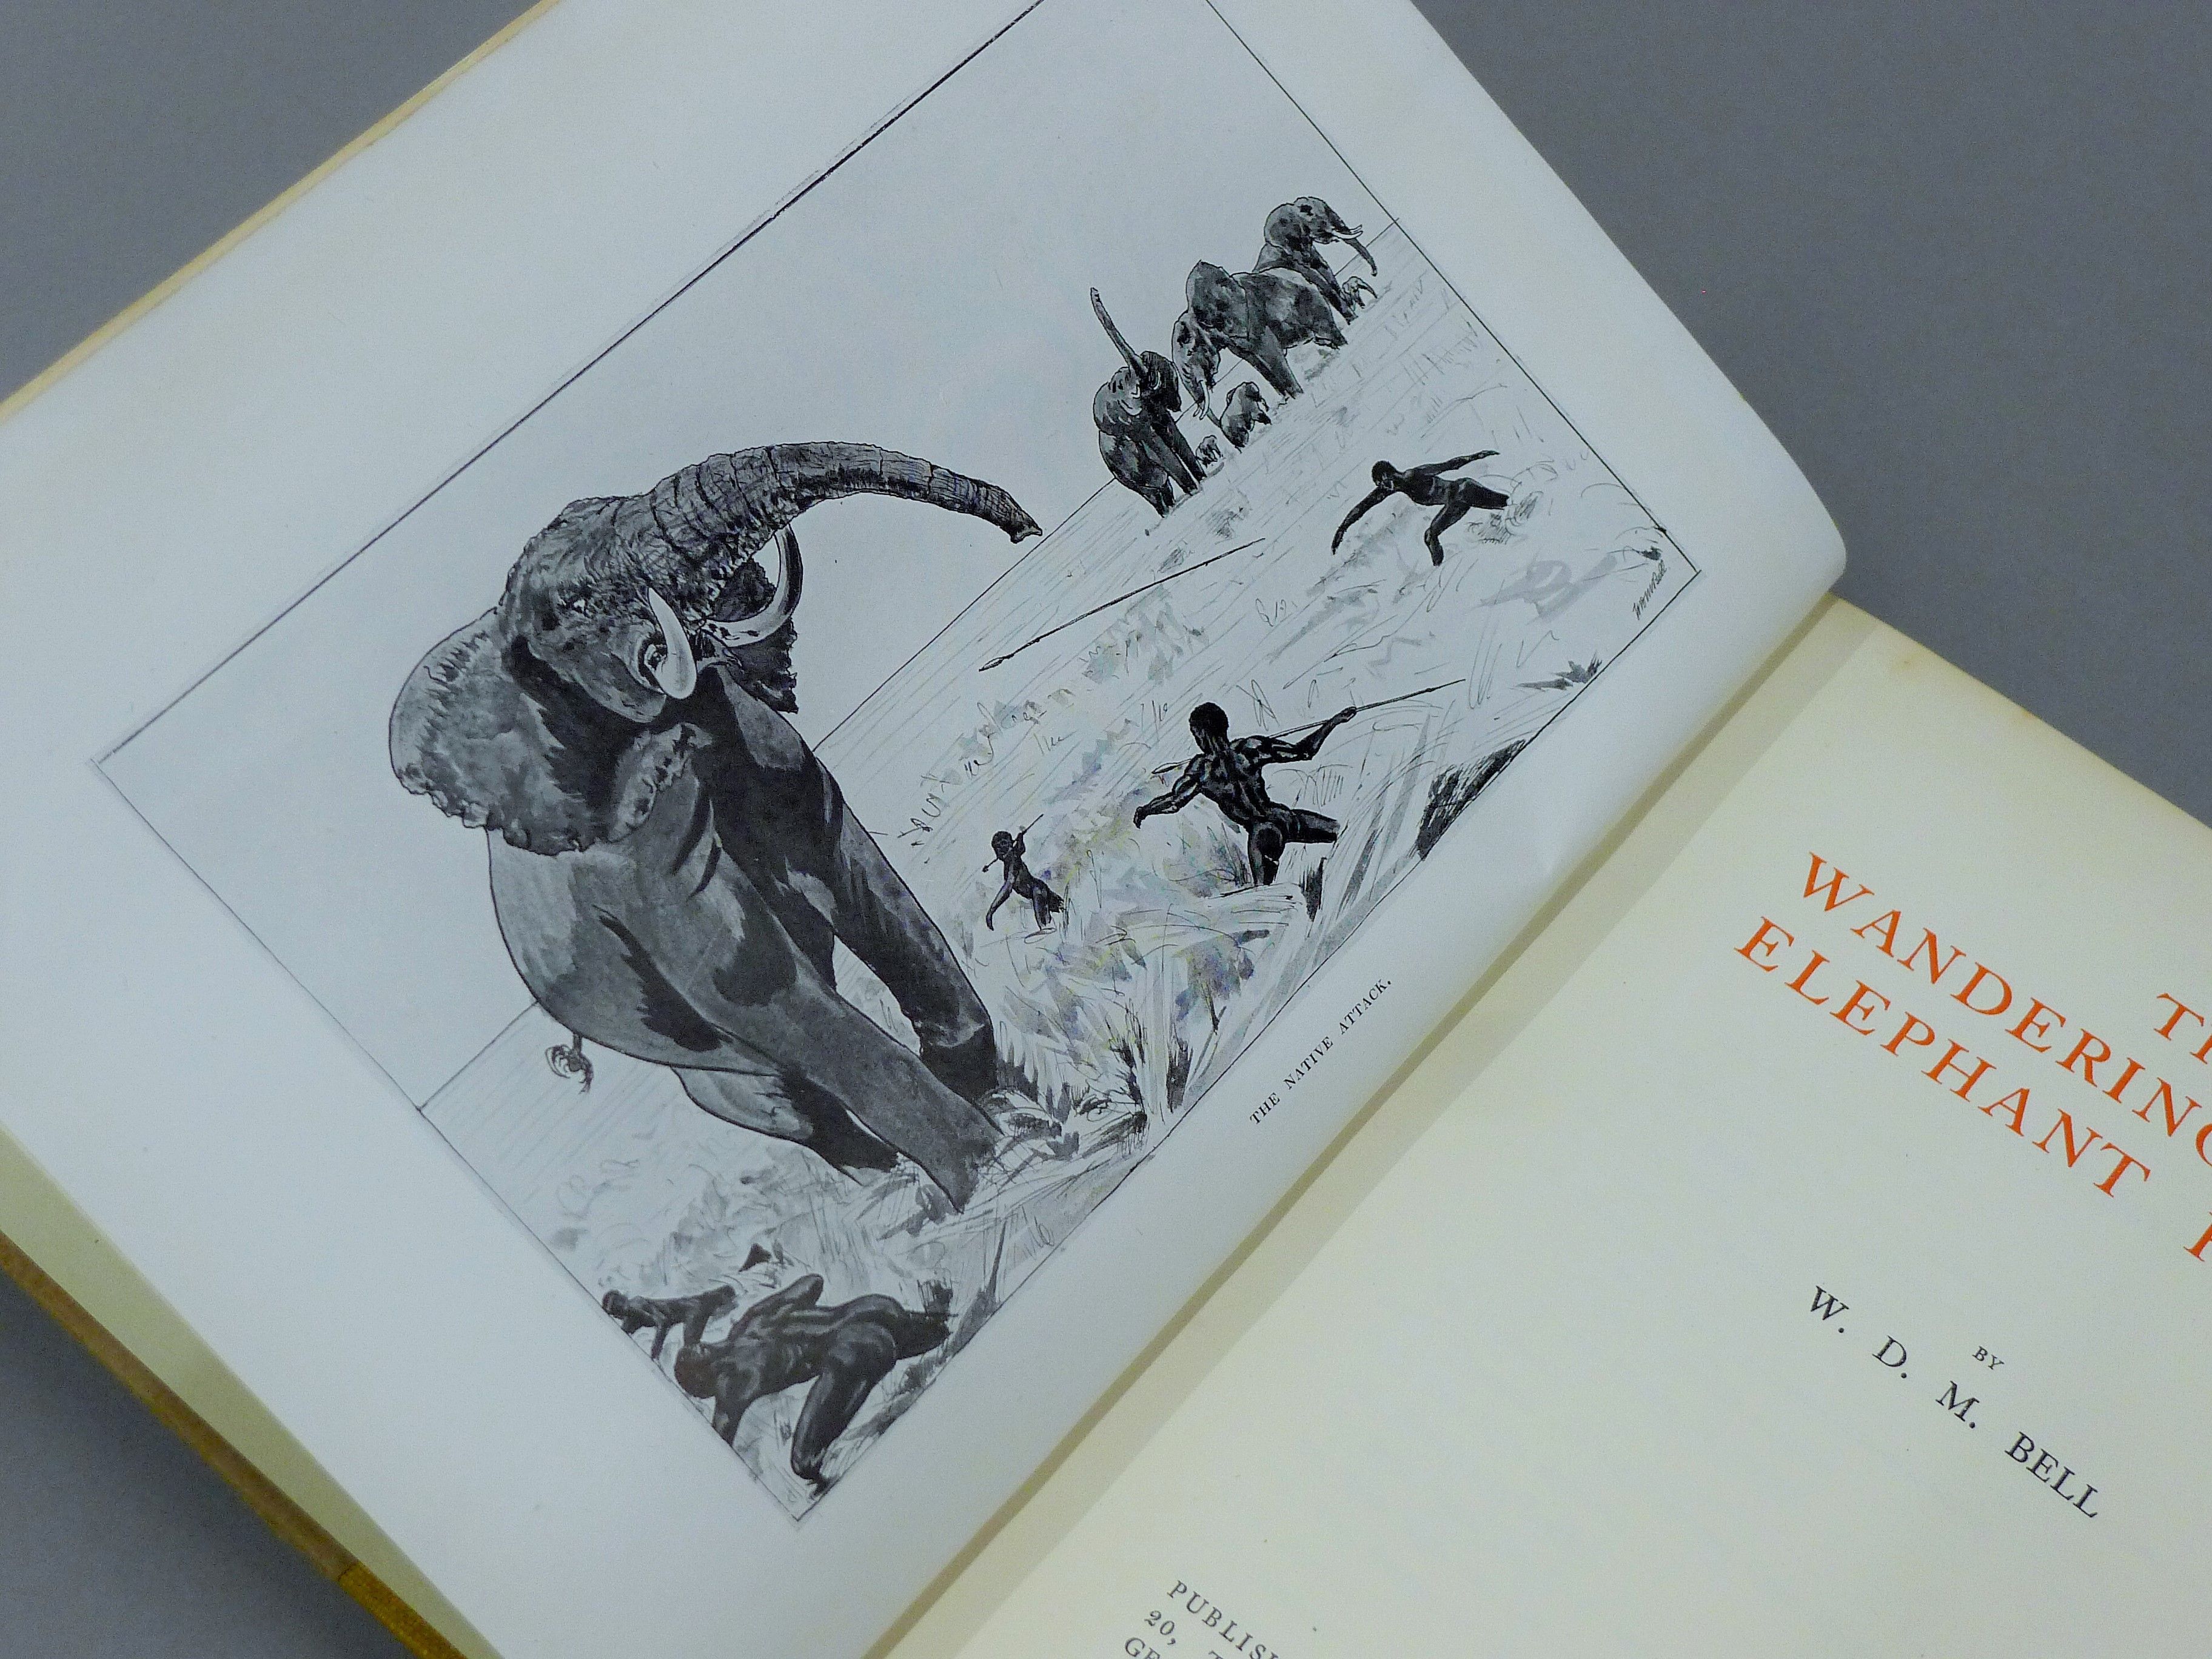 W D M Bell, The Wanderings of an Elephant Hunter, 1933, first edition. - Image 4 of 7